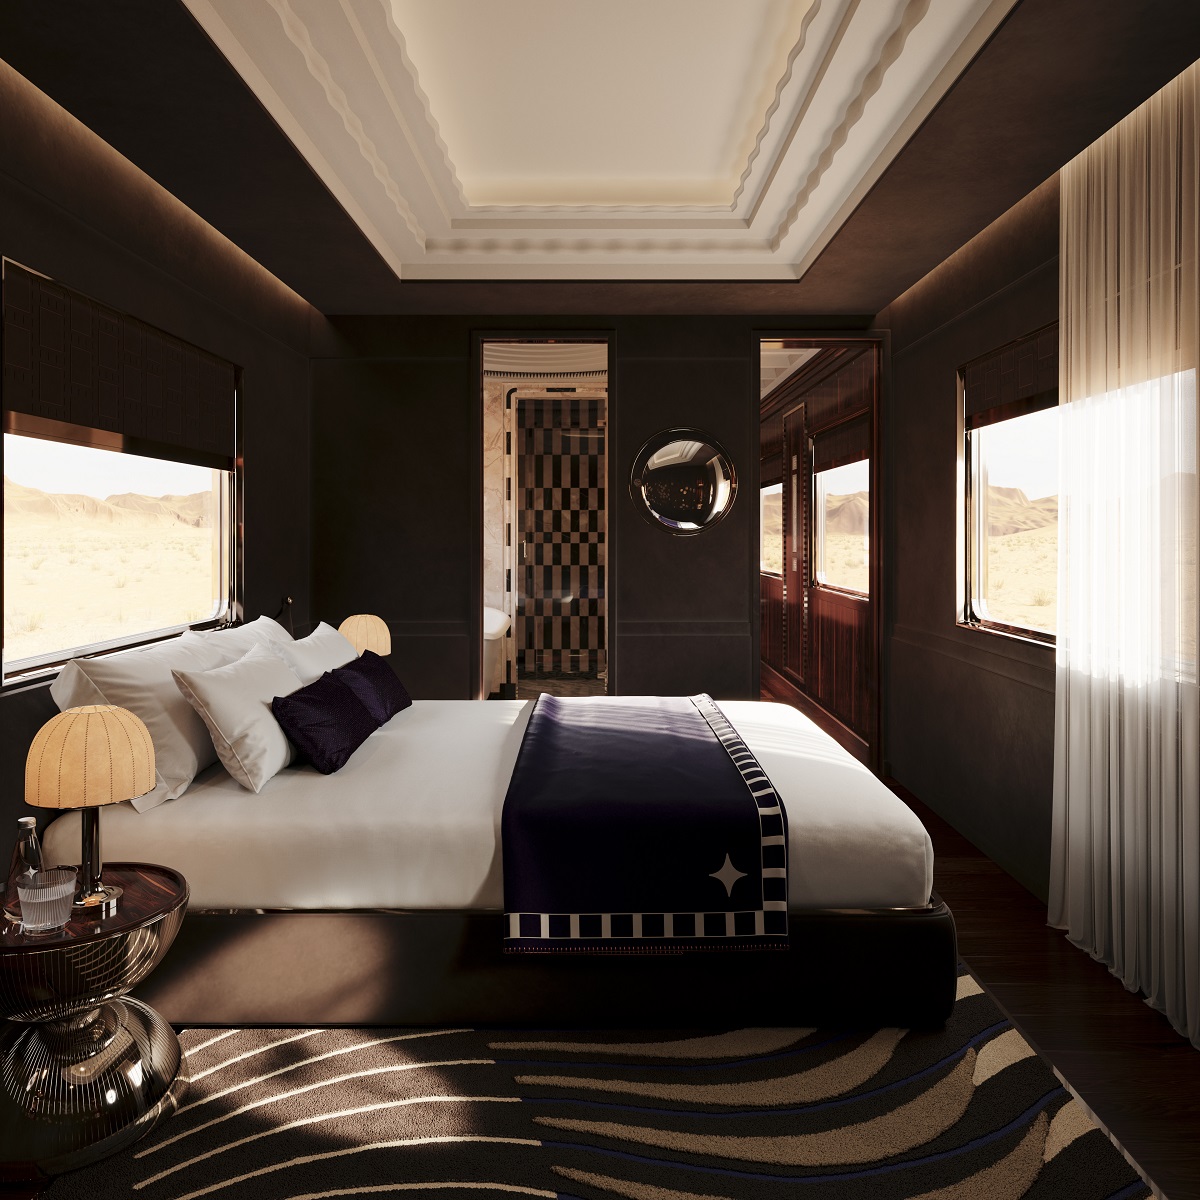 Presidential suite in Accor Orient Express bedroom design by Maxime d'Angeac